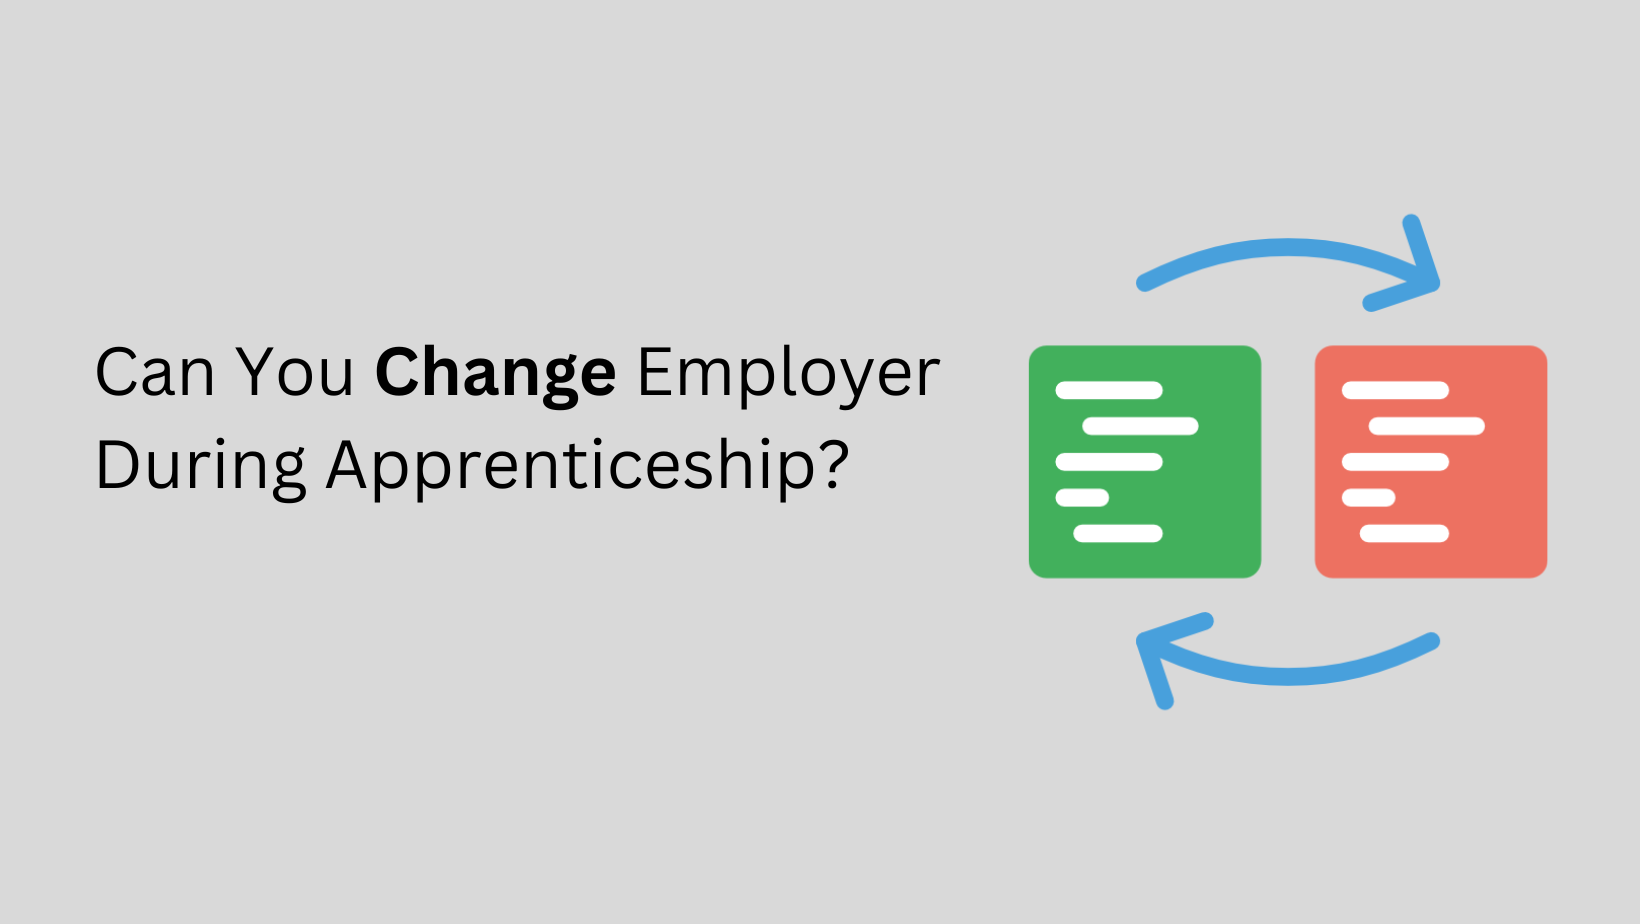 Can You Change Employer During Apprenticeship